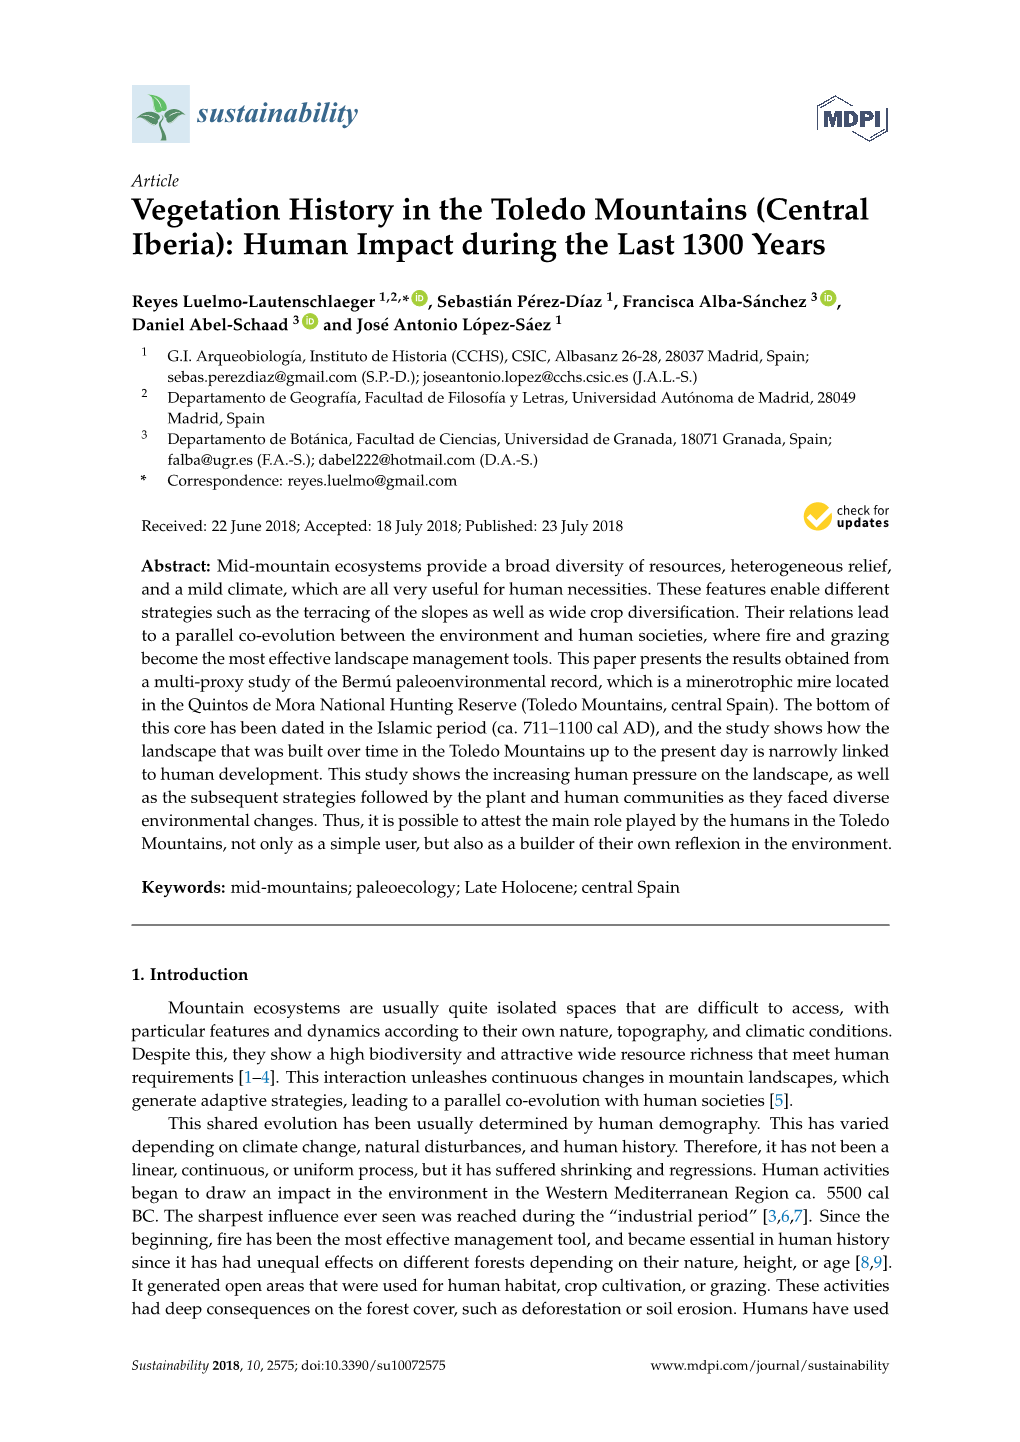 Vegetation History in the Toledo Mountains (Central Iberia): Human Impact During the Last 1300 Years